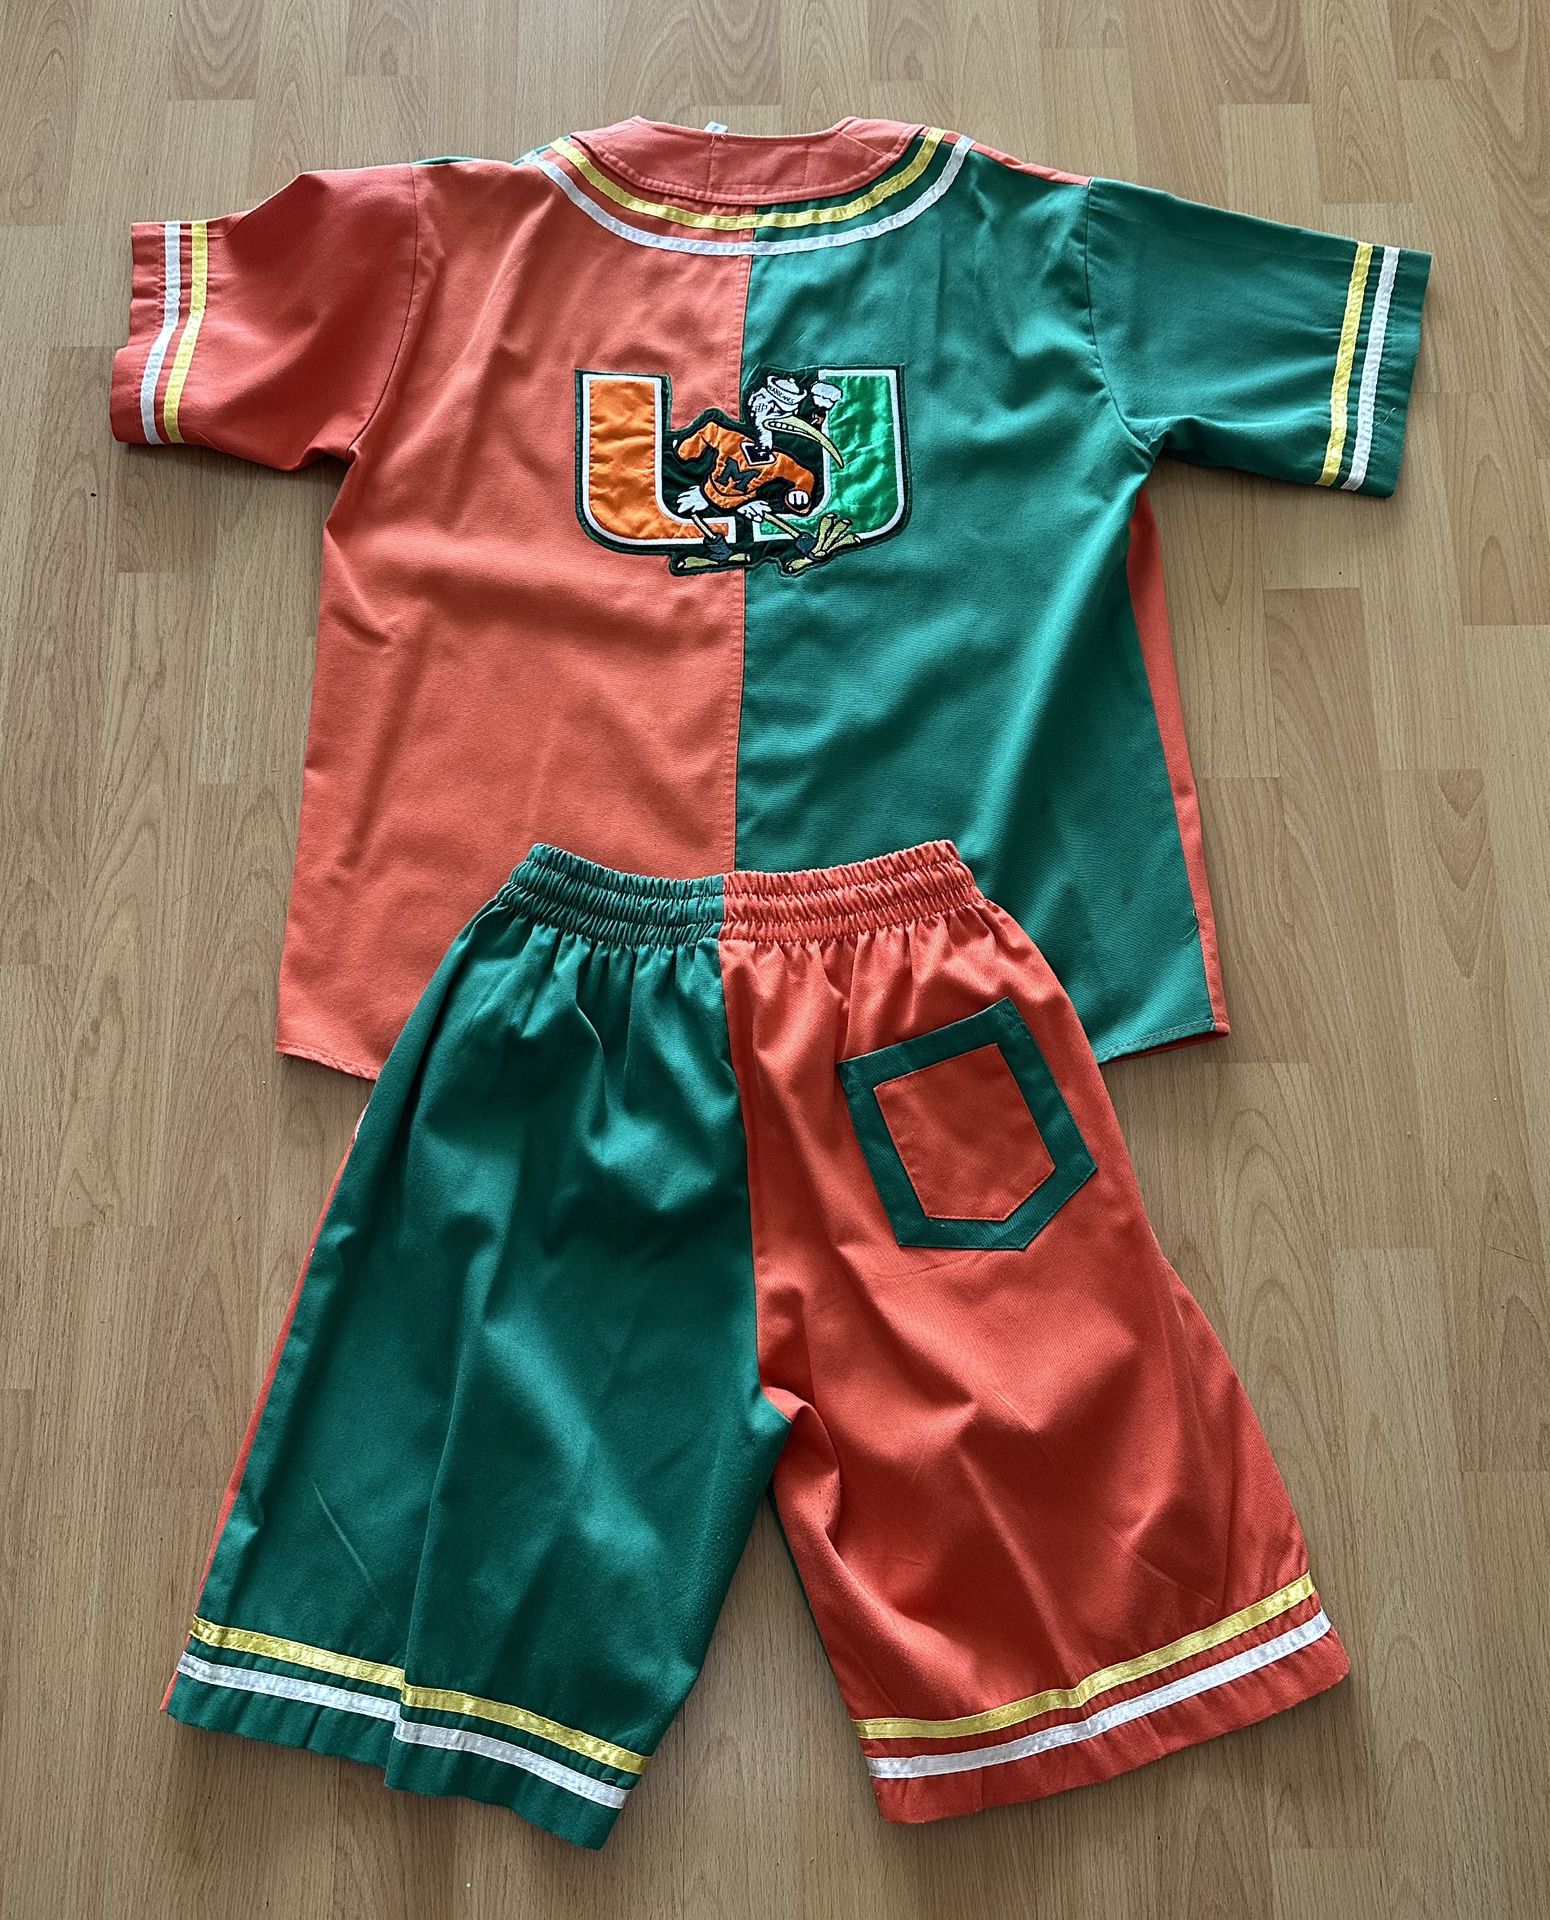 Miami Hurricanes Baseball Jersey for Sale in Fort Lauderdale, FL - OfferUp